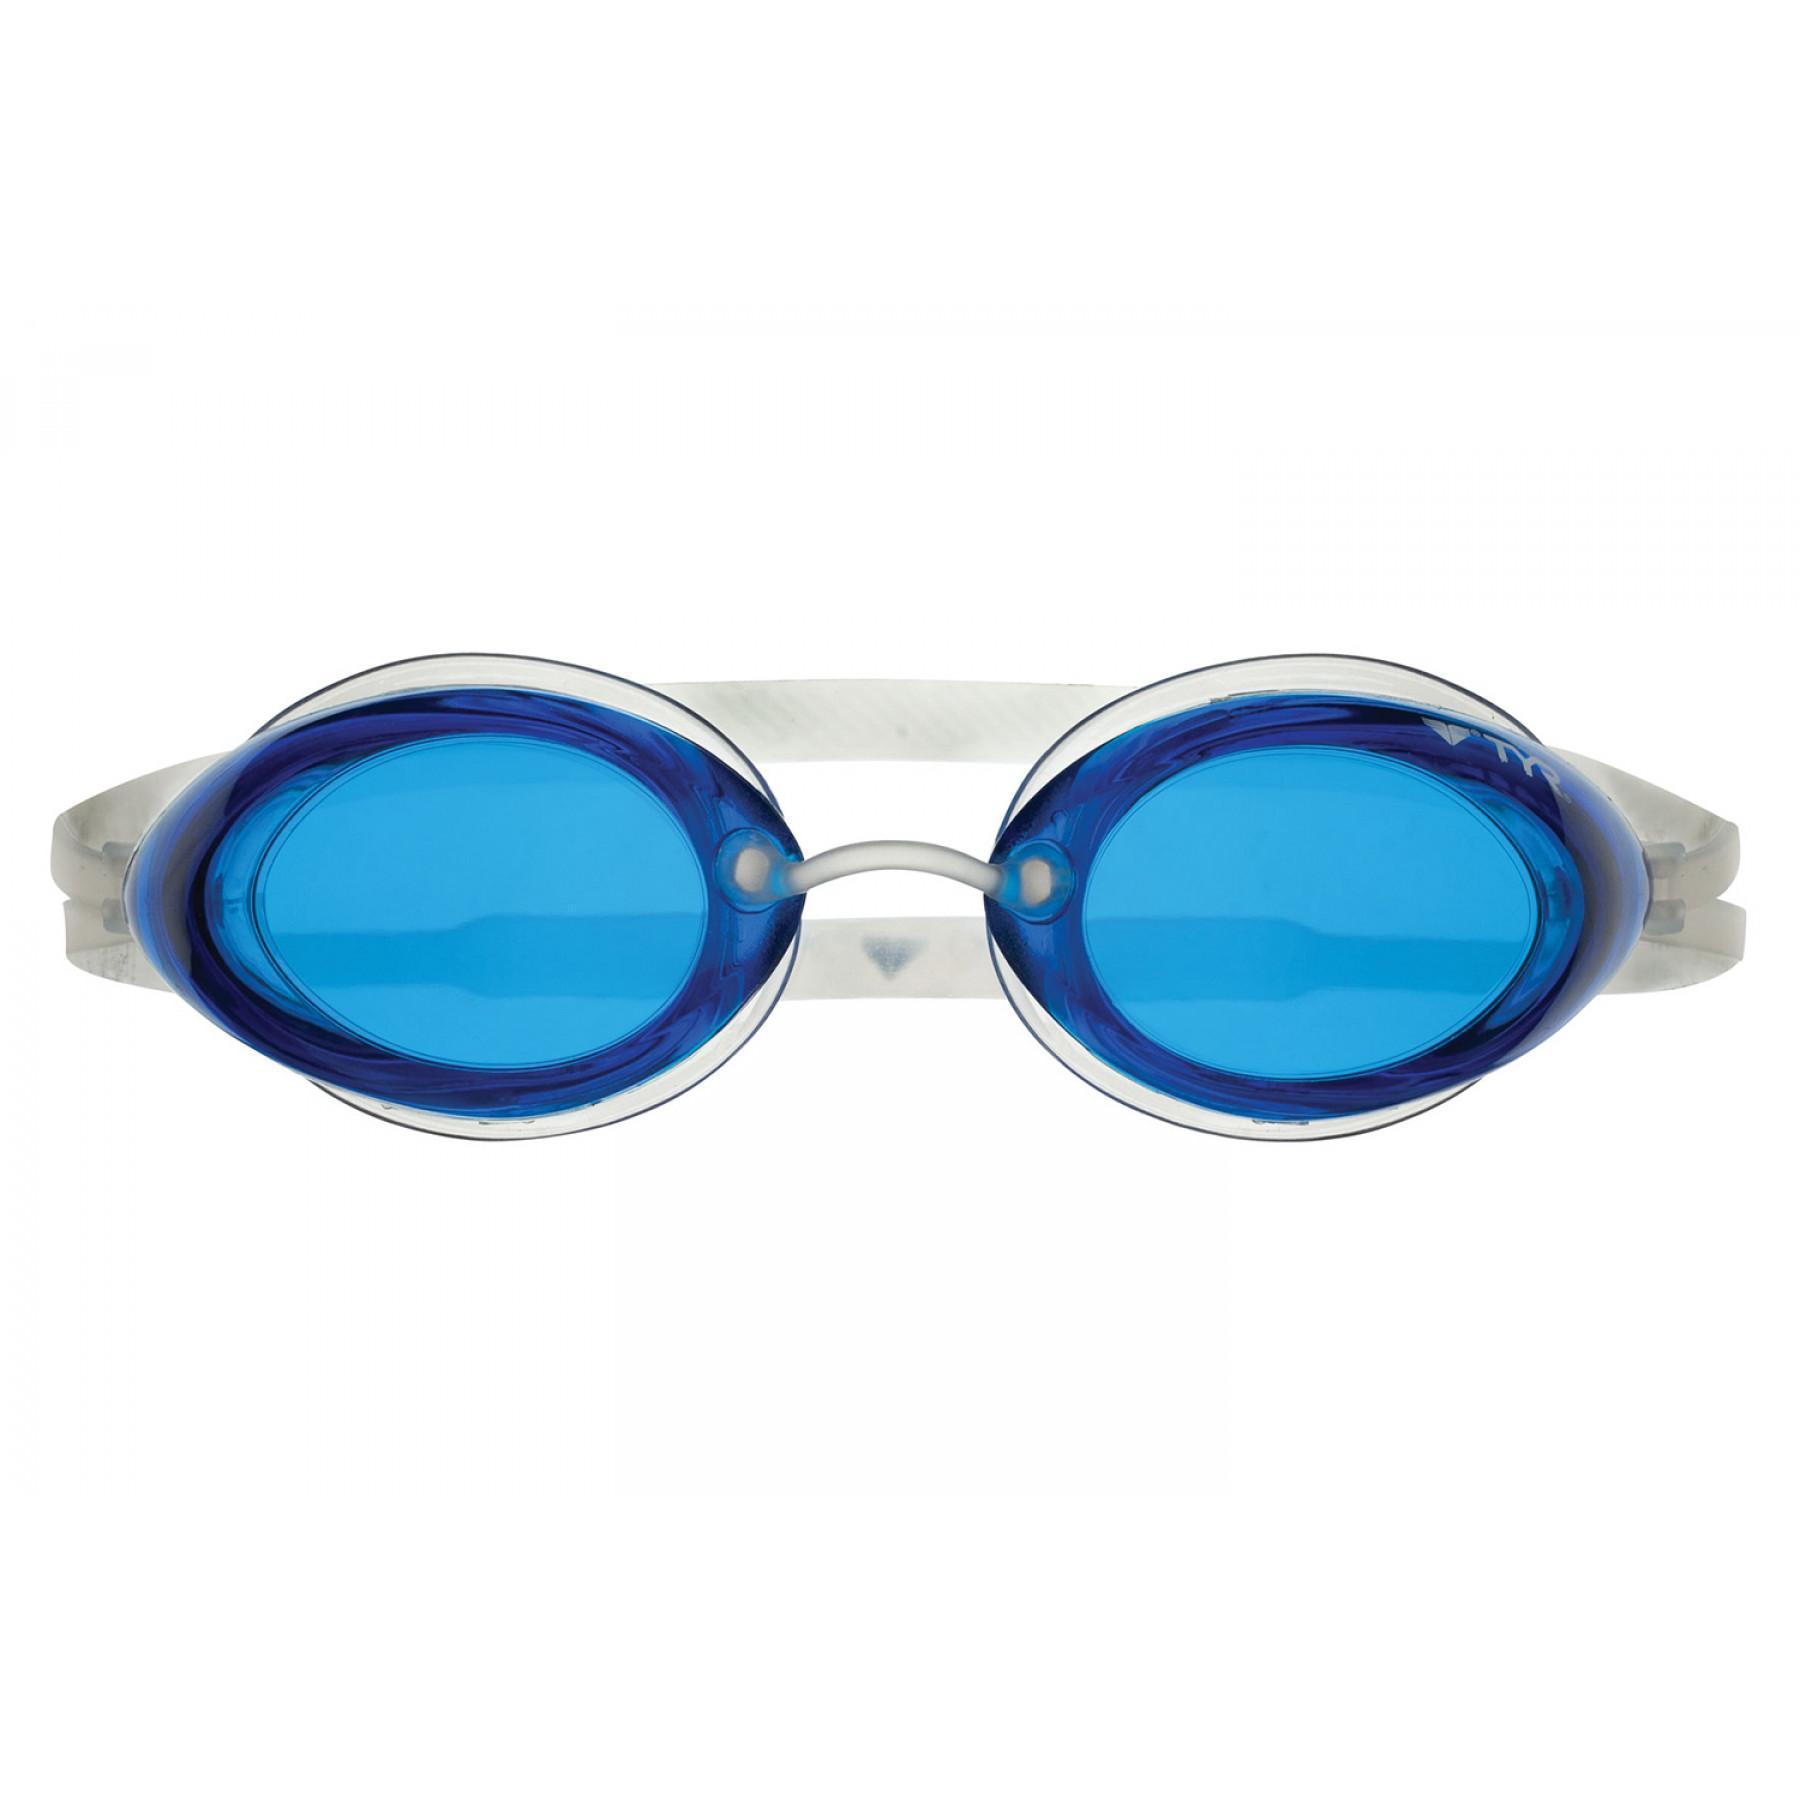 Swimming goggles TYR Tracer racing